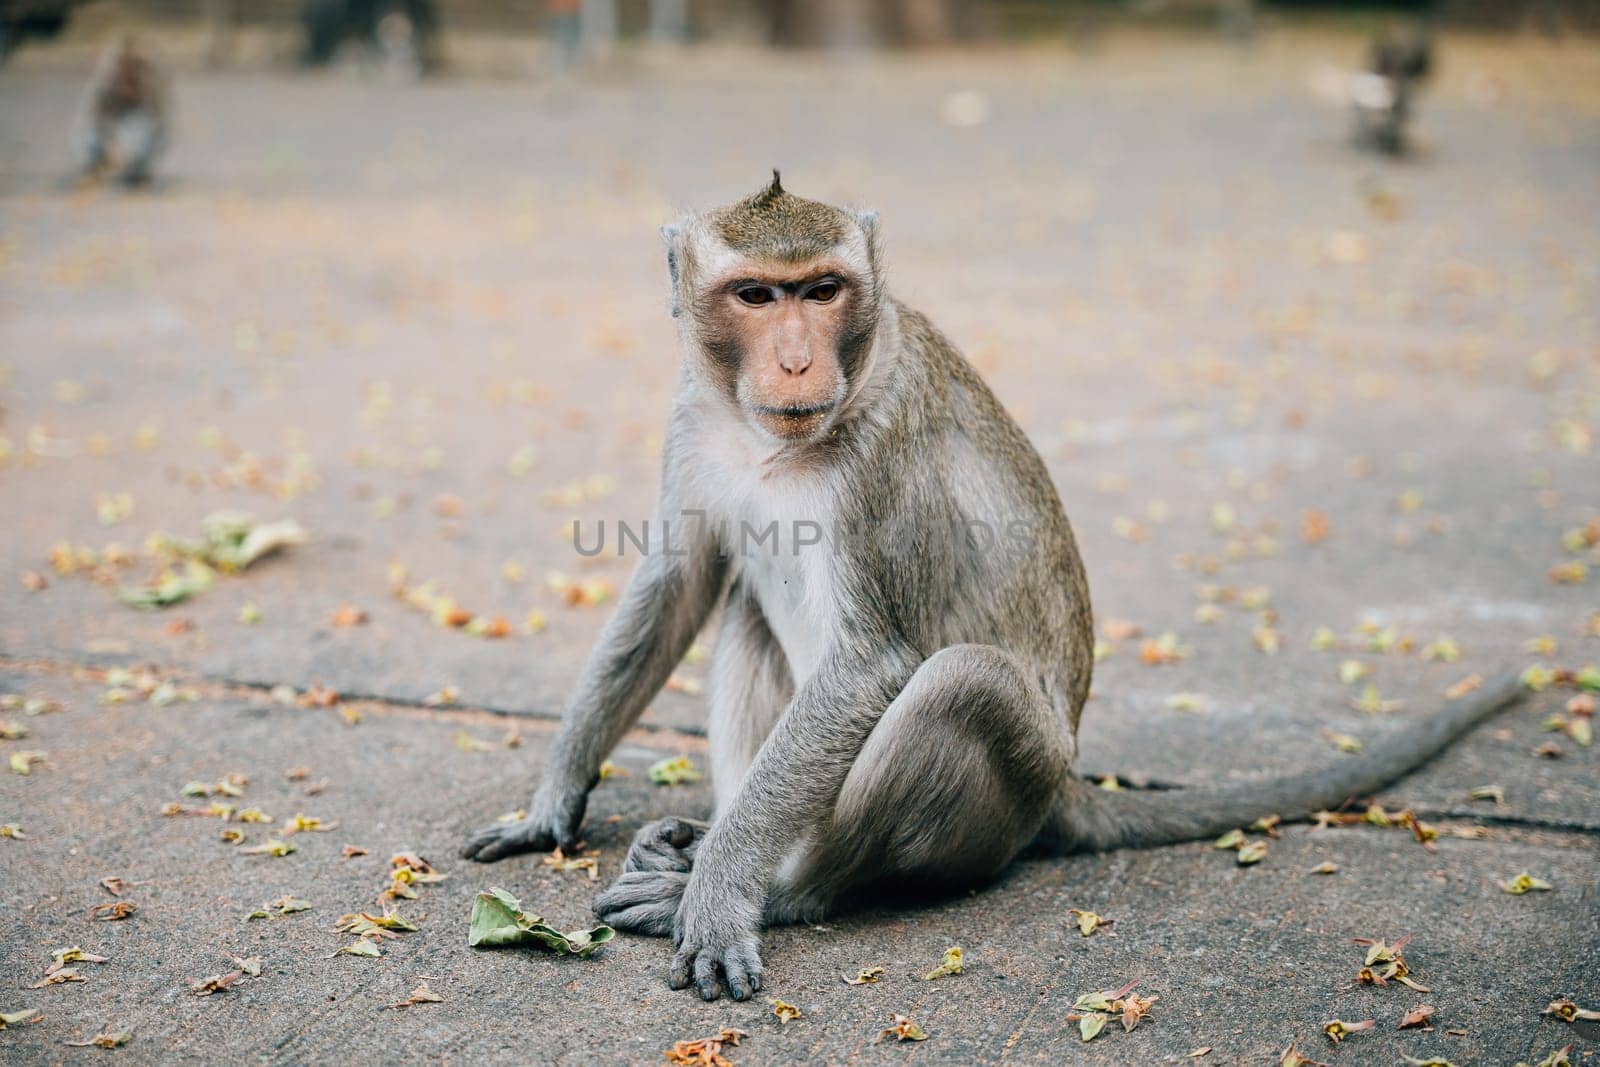 In the wilderness a small clean cynomolgus monkey with a hairy tail sitting and feeding in a zoo. Nature's beauty captured Portrait of a fun cute primate. Give me.